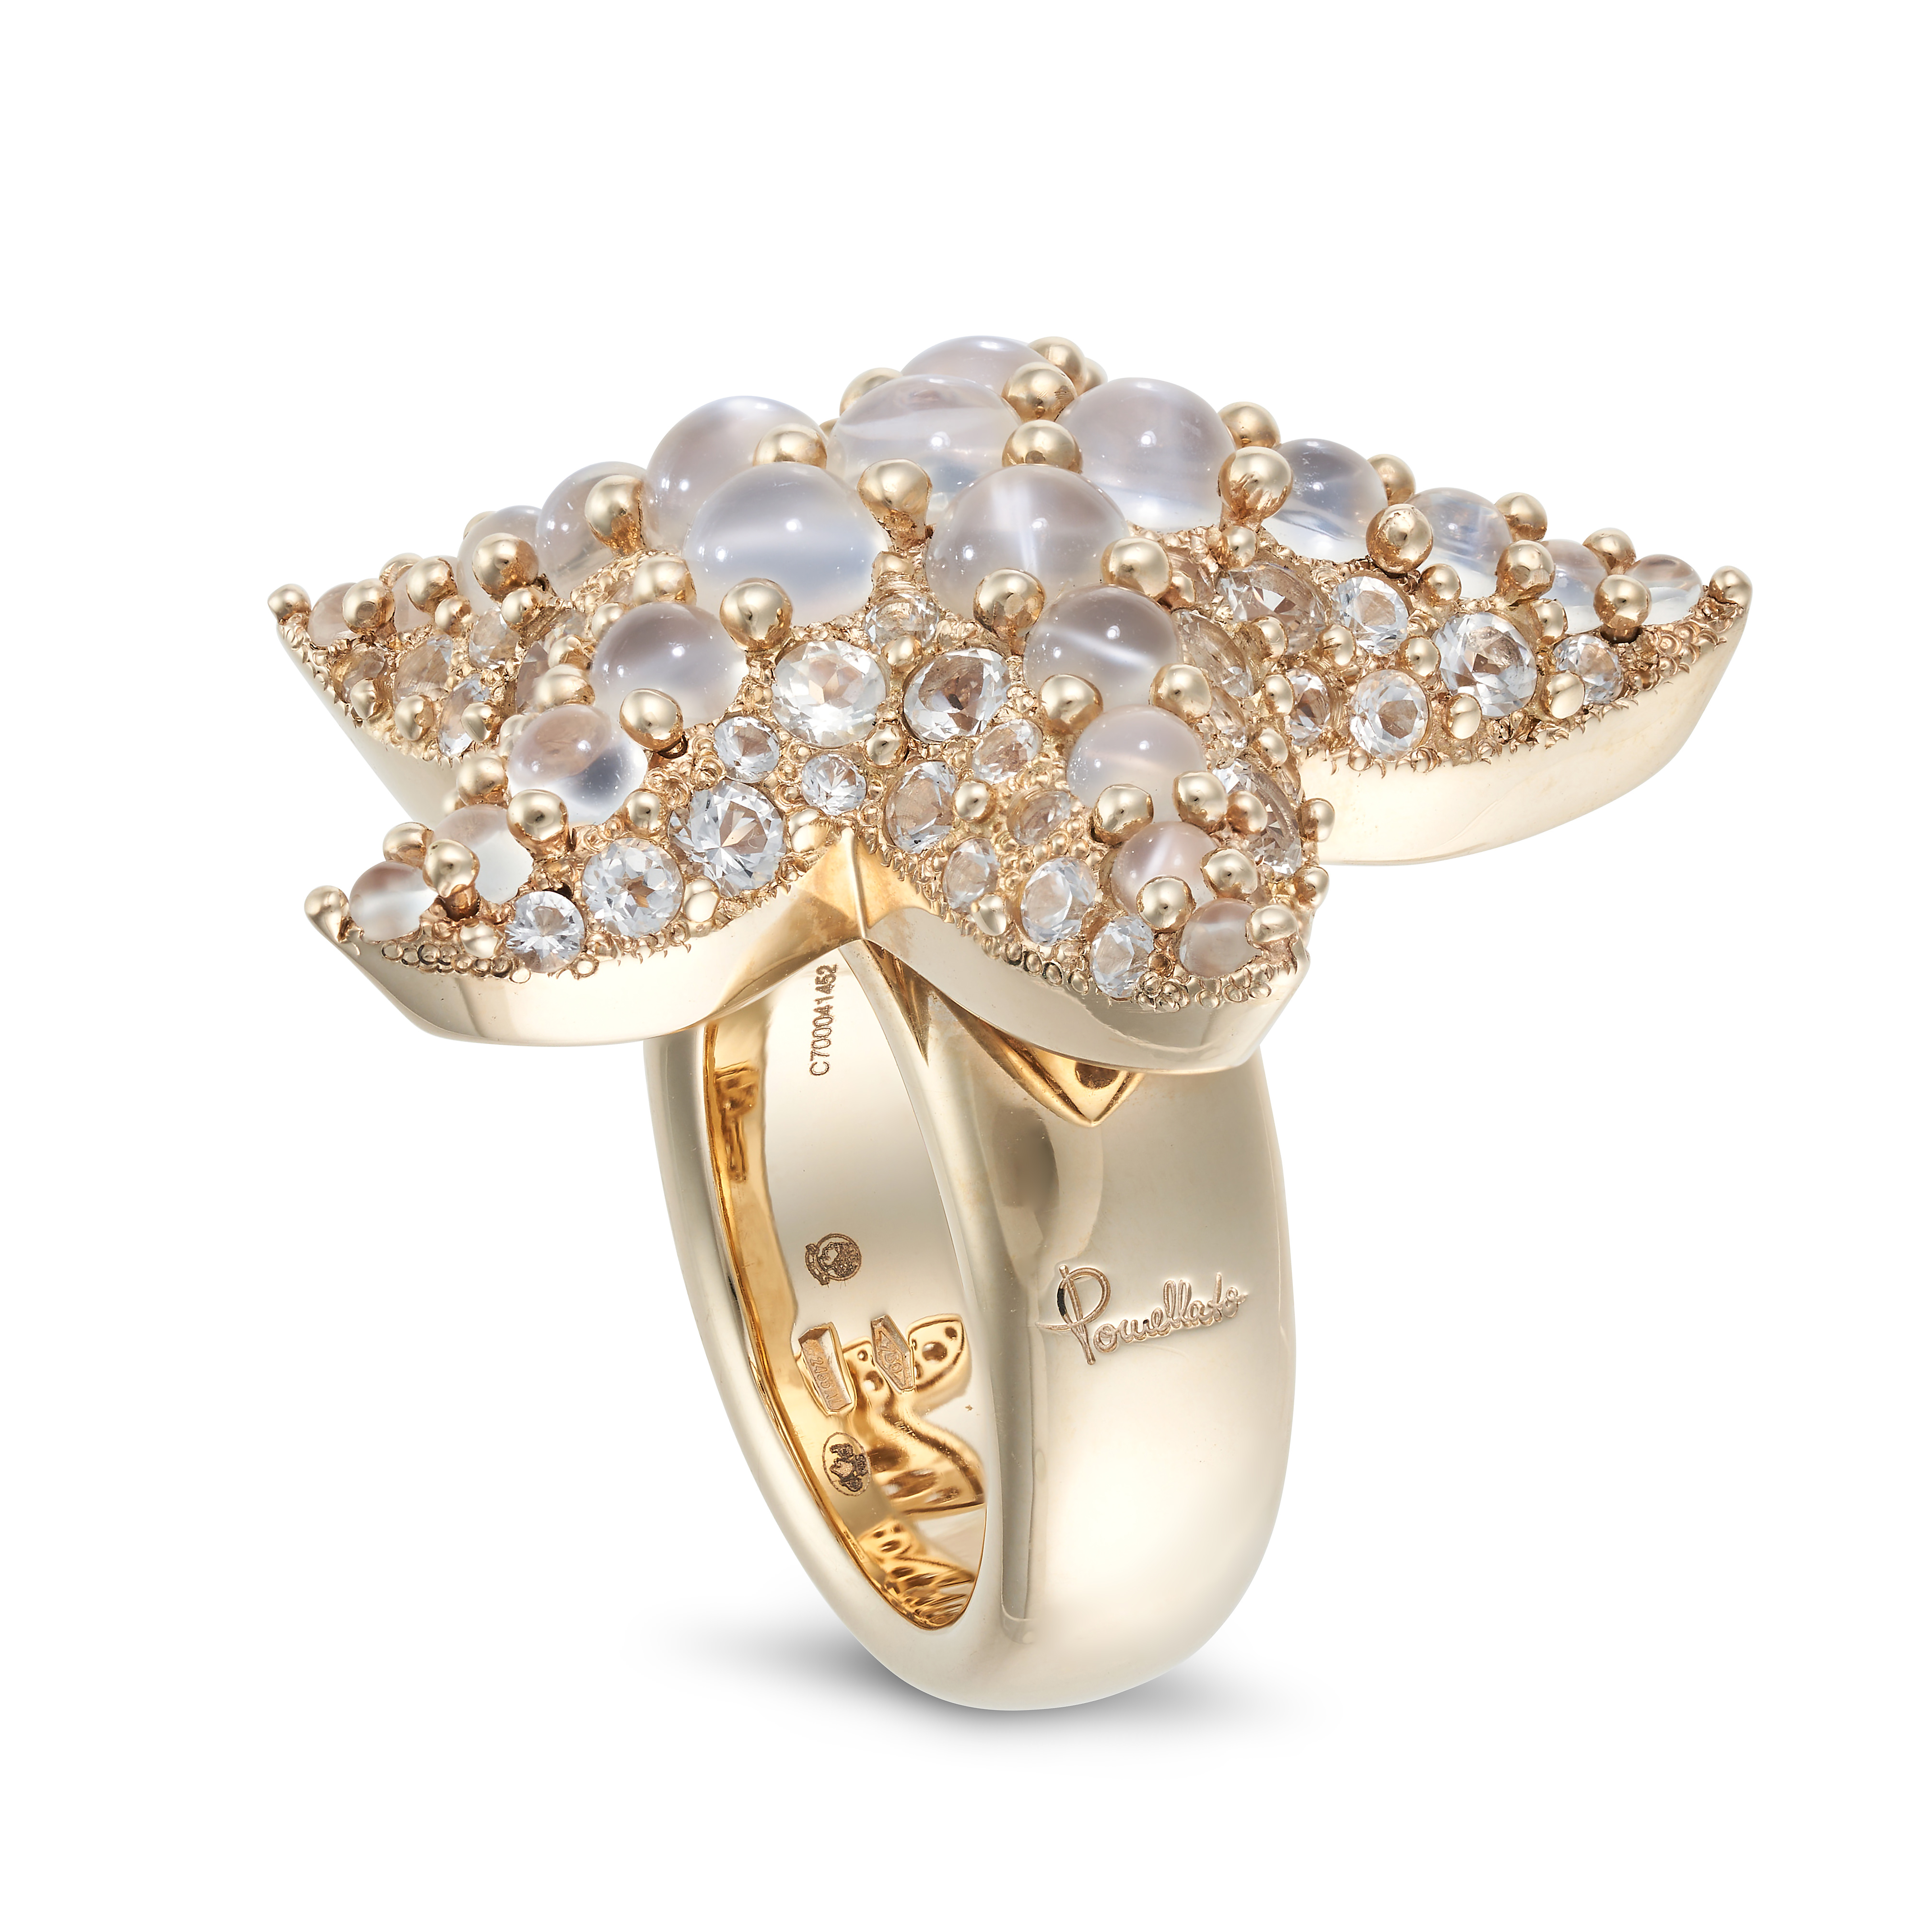 POMELLATO, A MOONSTONE AND WHITE TOPAZ STARFISH RING designed as a starfish, set throughout with ... - Image 2 of 2